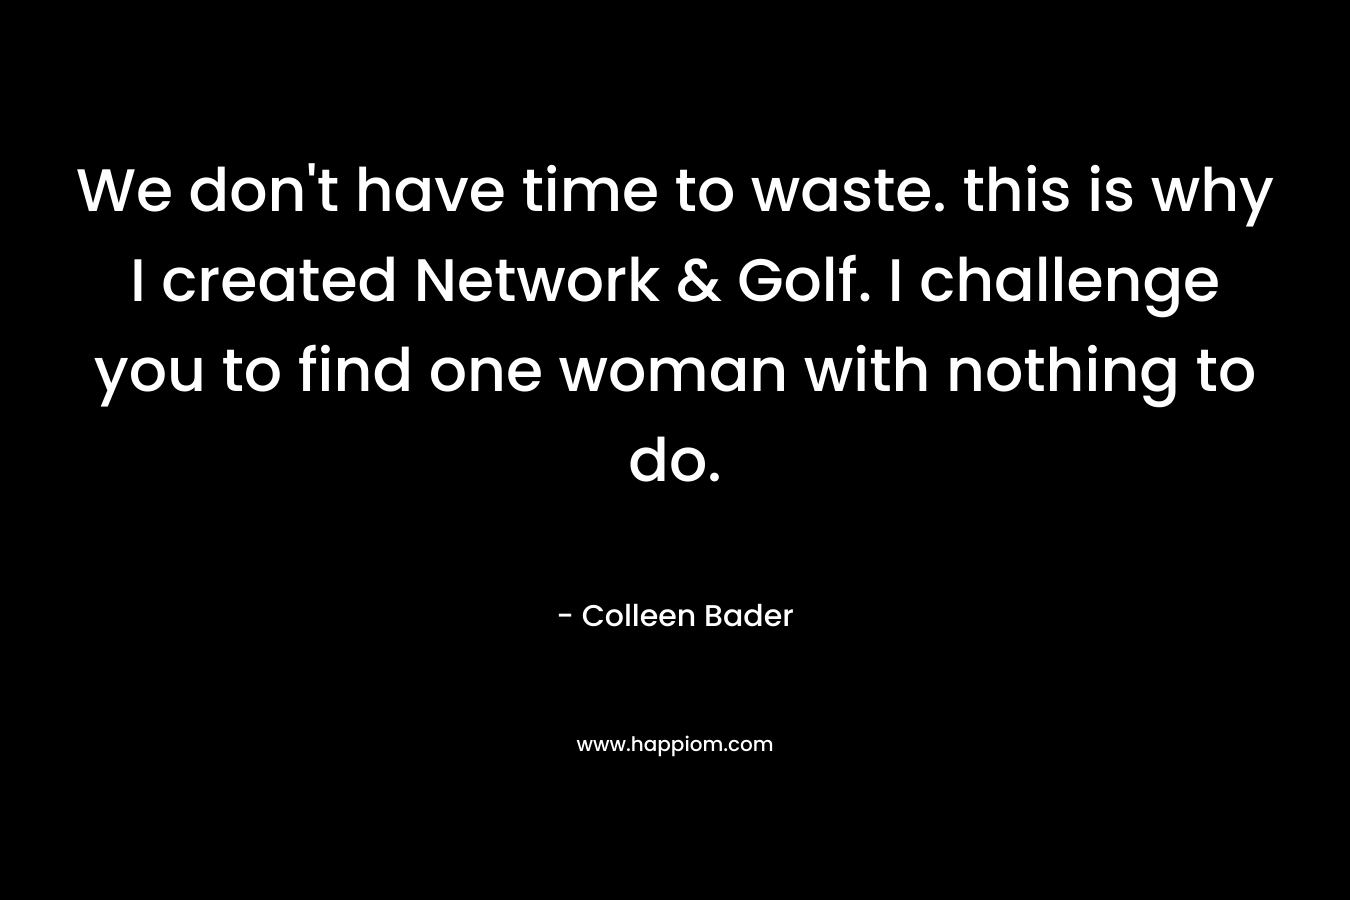 We don't have time to waste. this is why I created Network & Golf. I challenge you to find one woman with nothing to do.